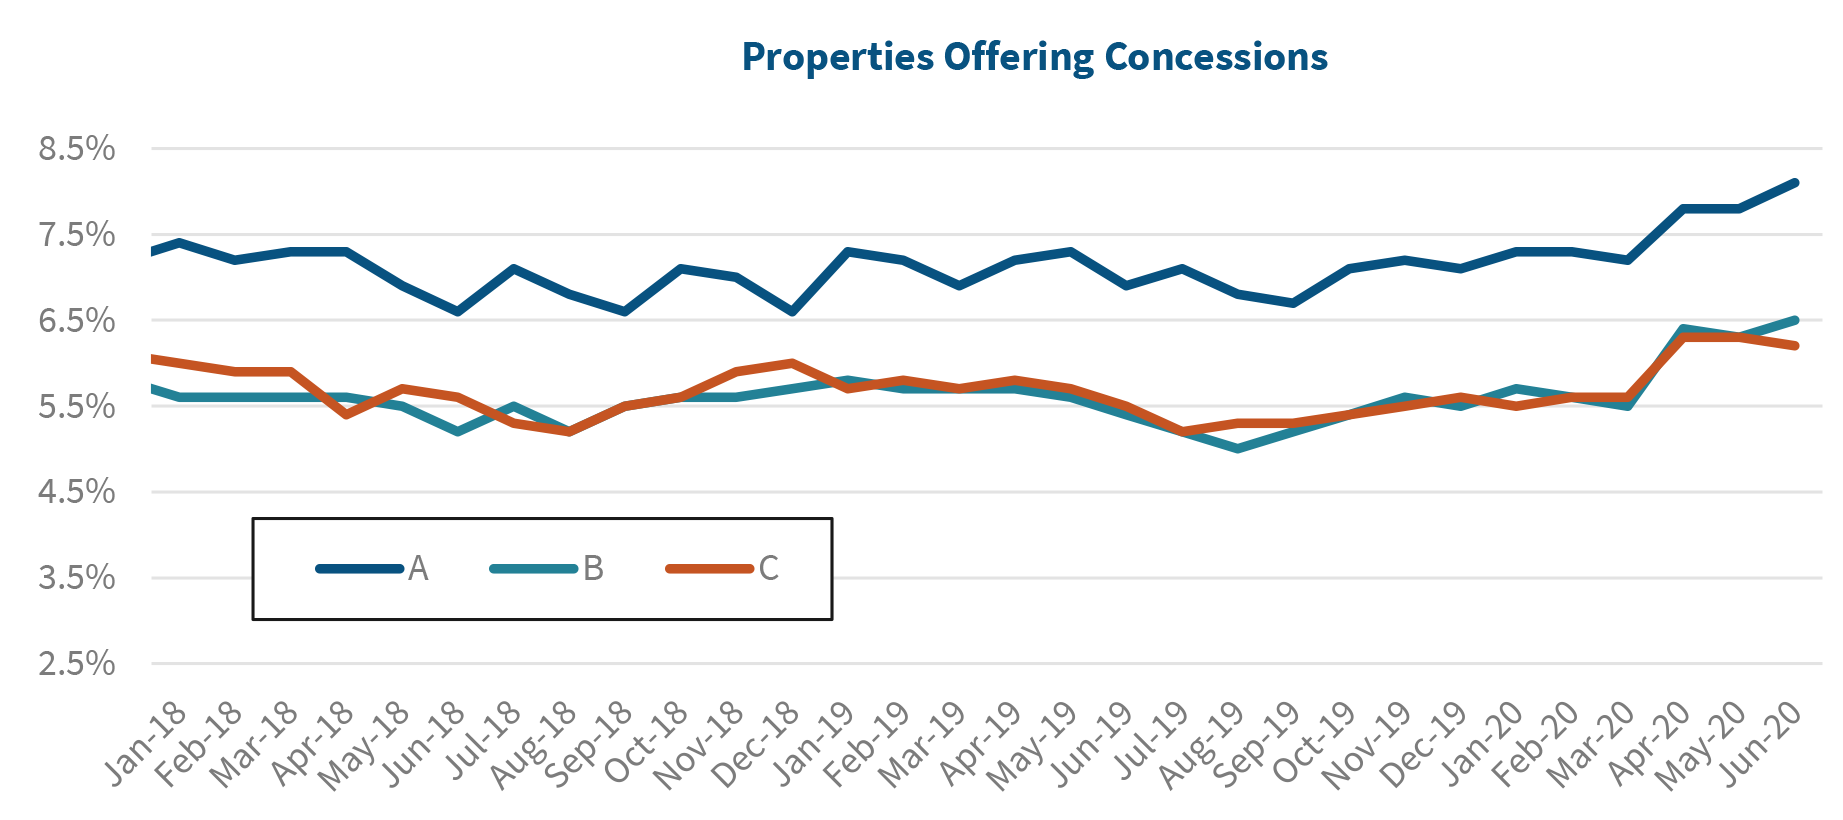 Properties Offering Concessions